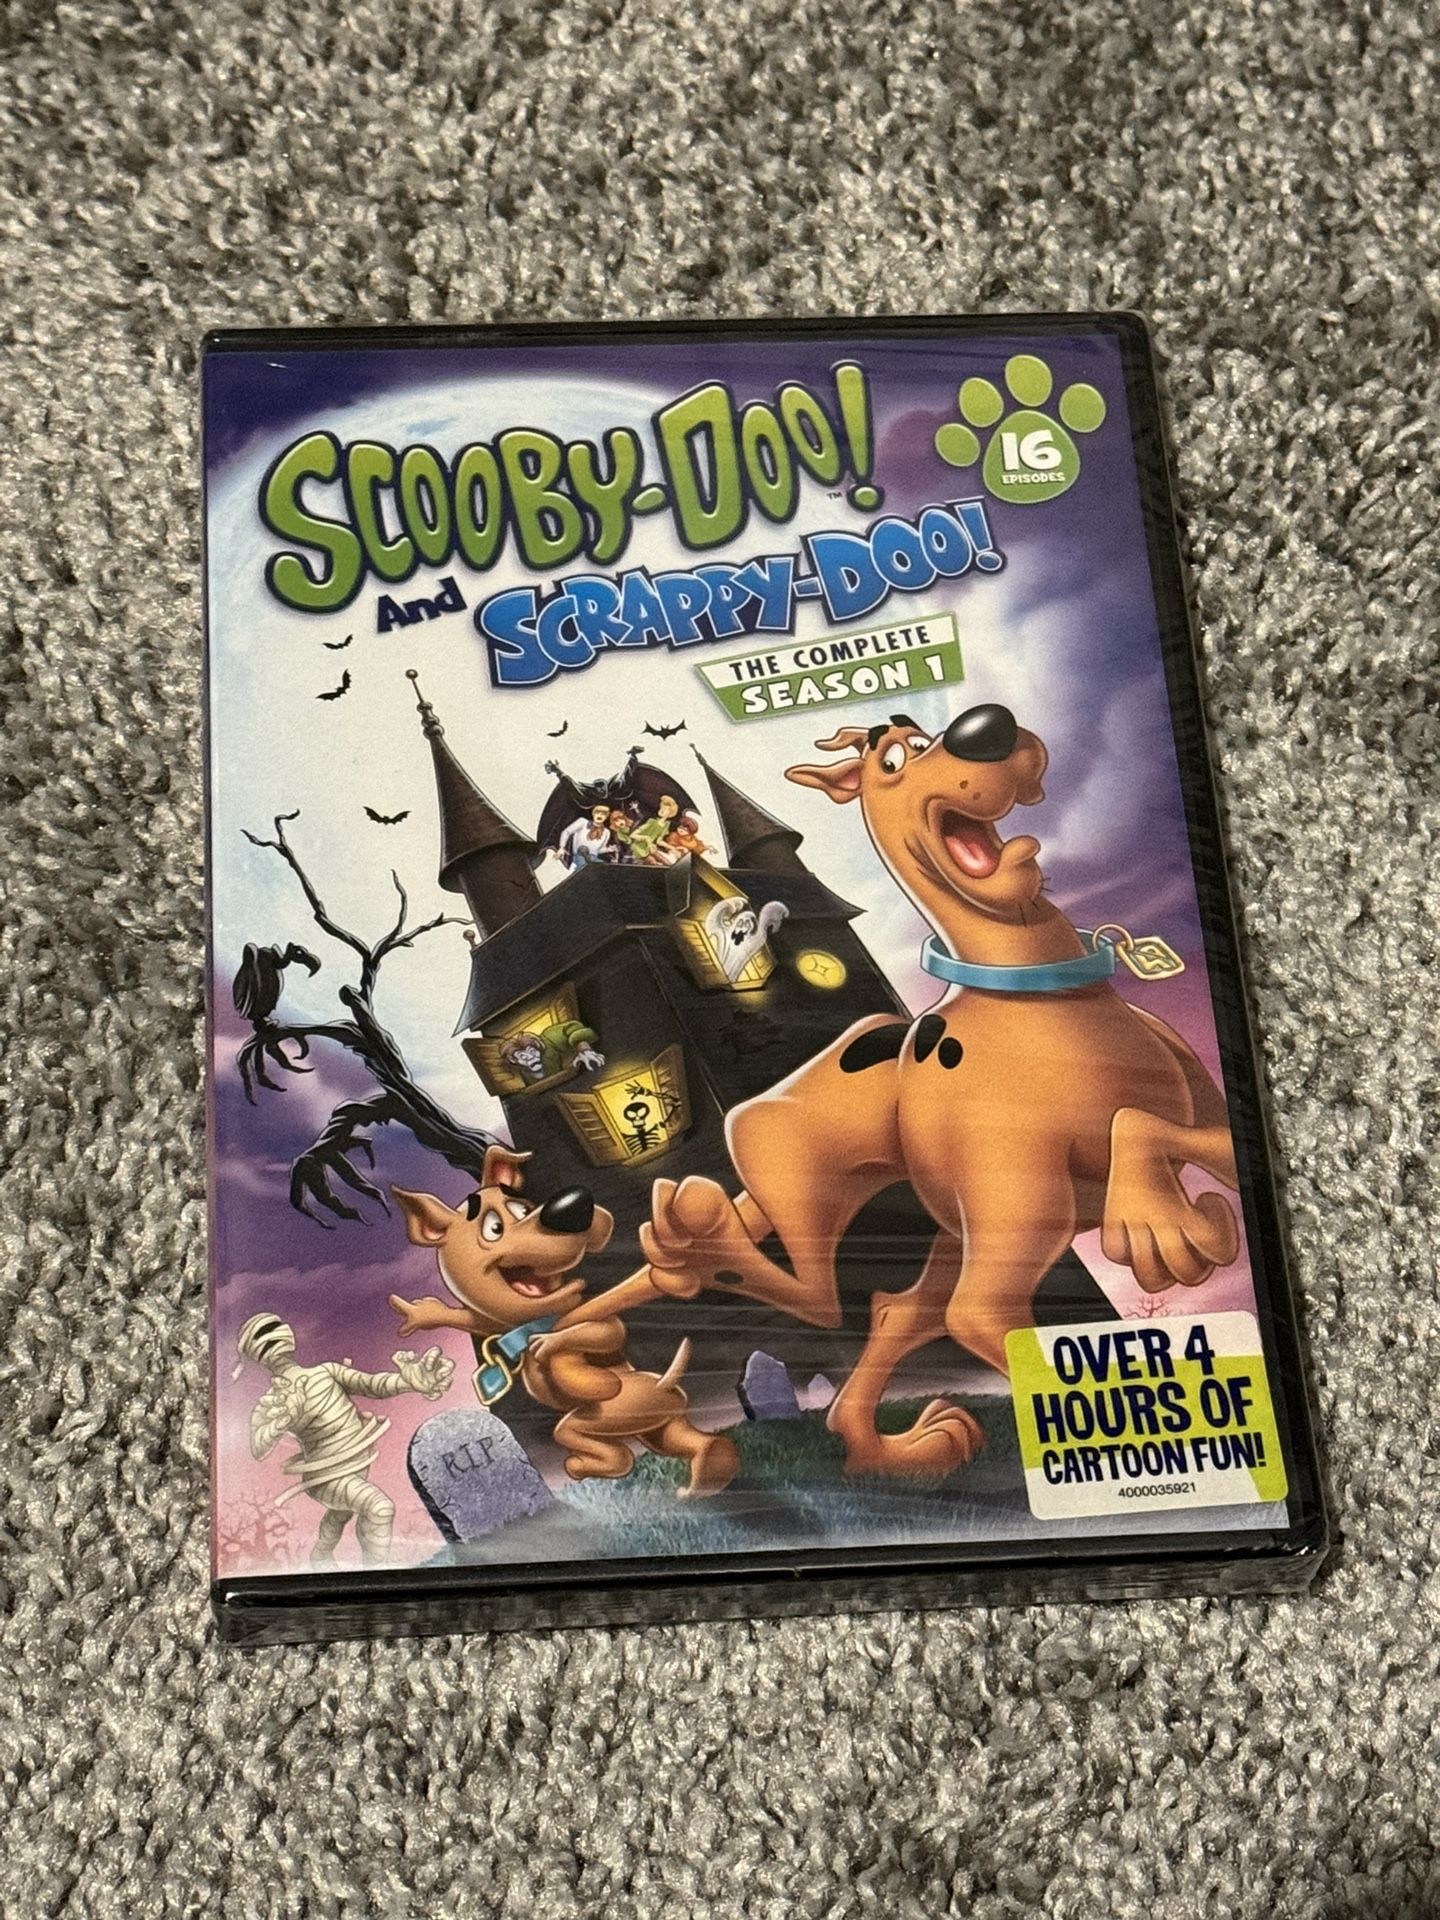 Scooby Doo And Scrappy Doo: The Complete First Season DVD